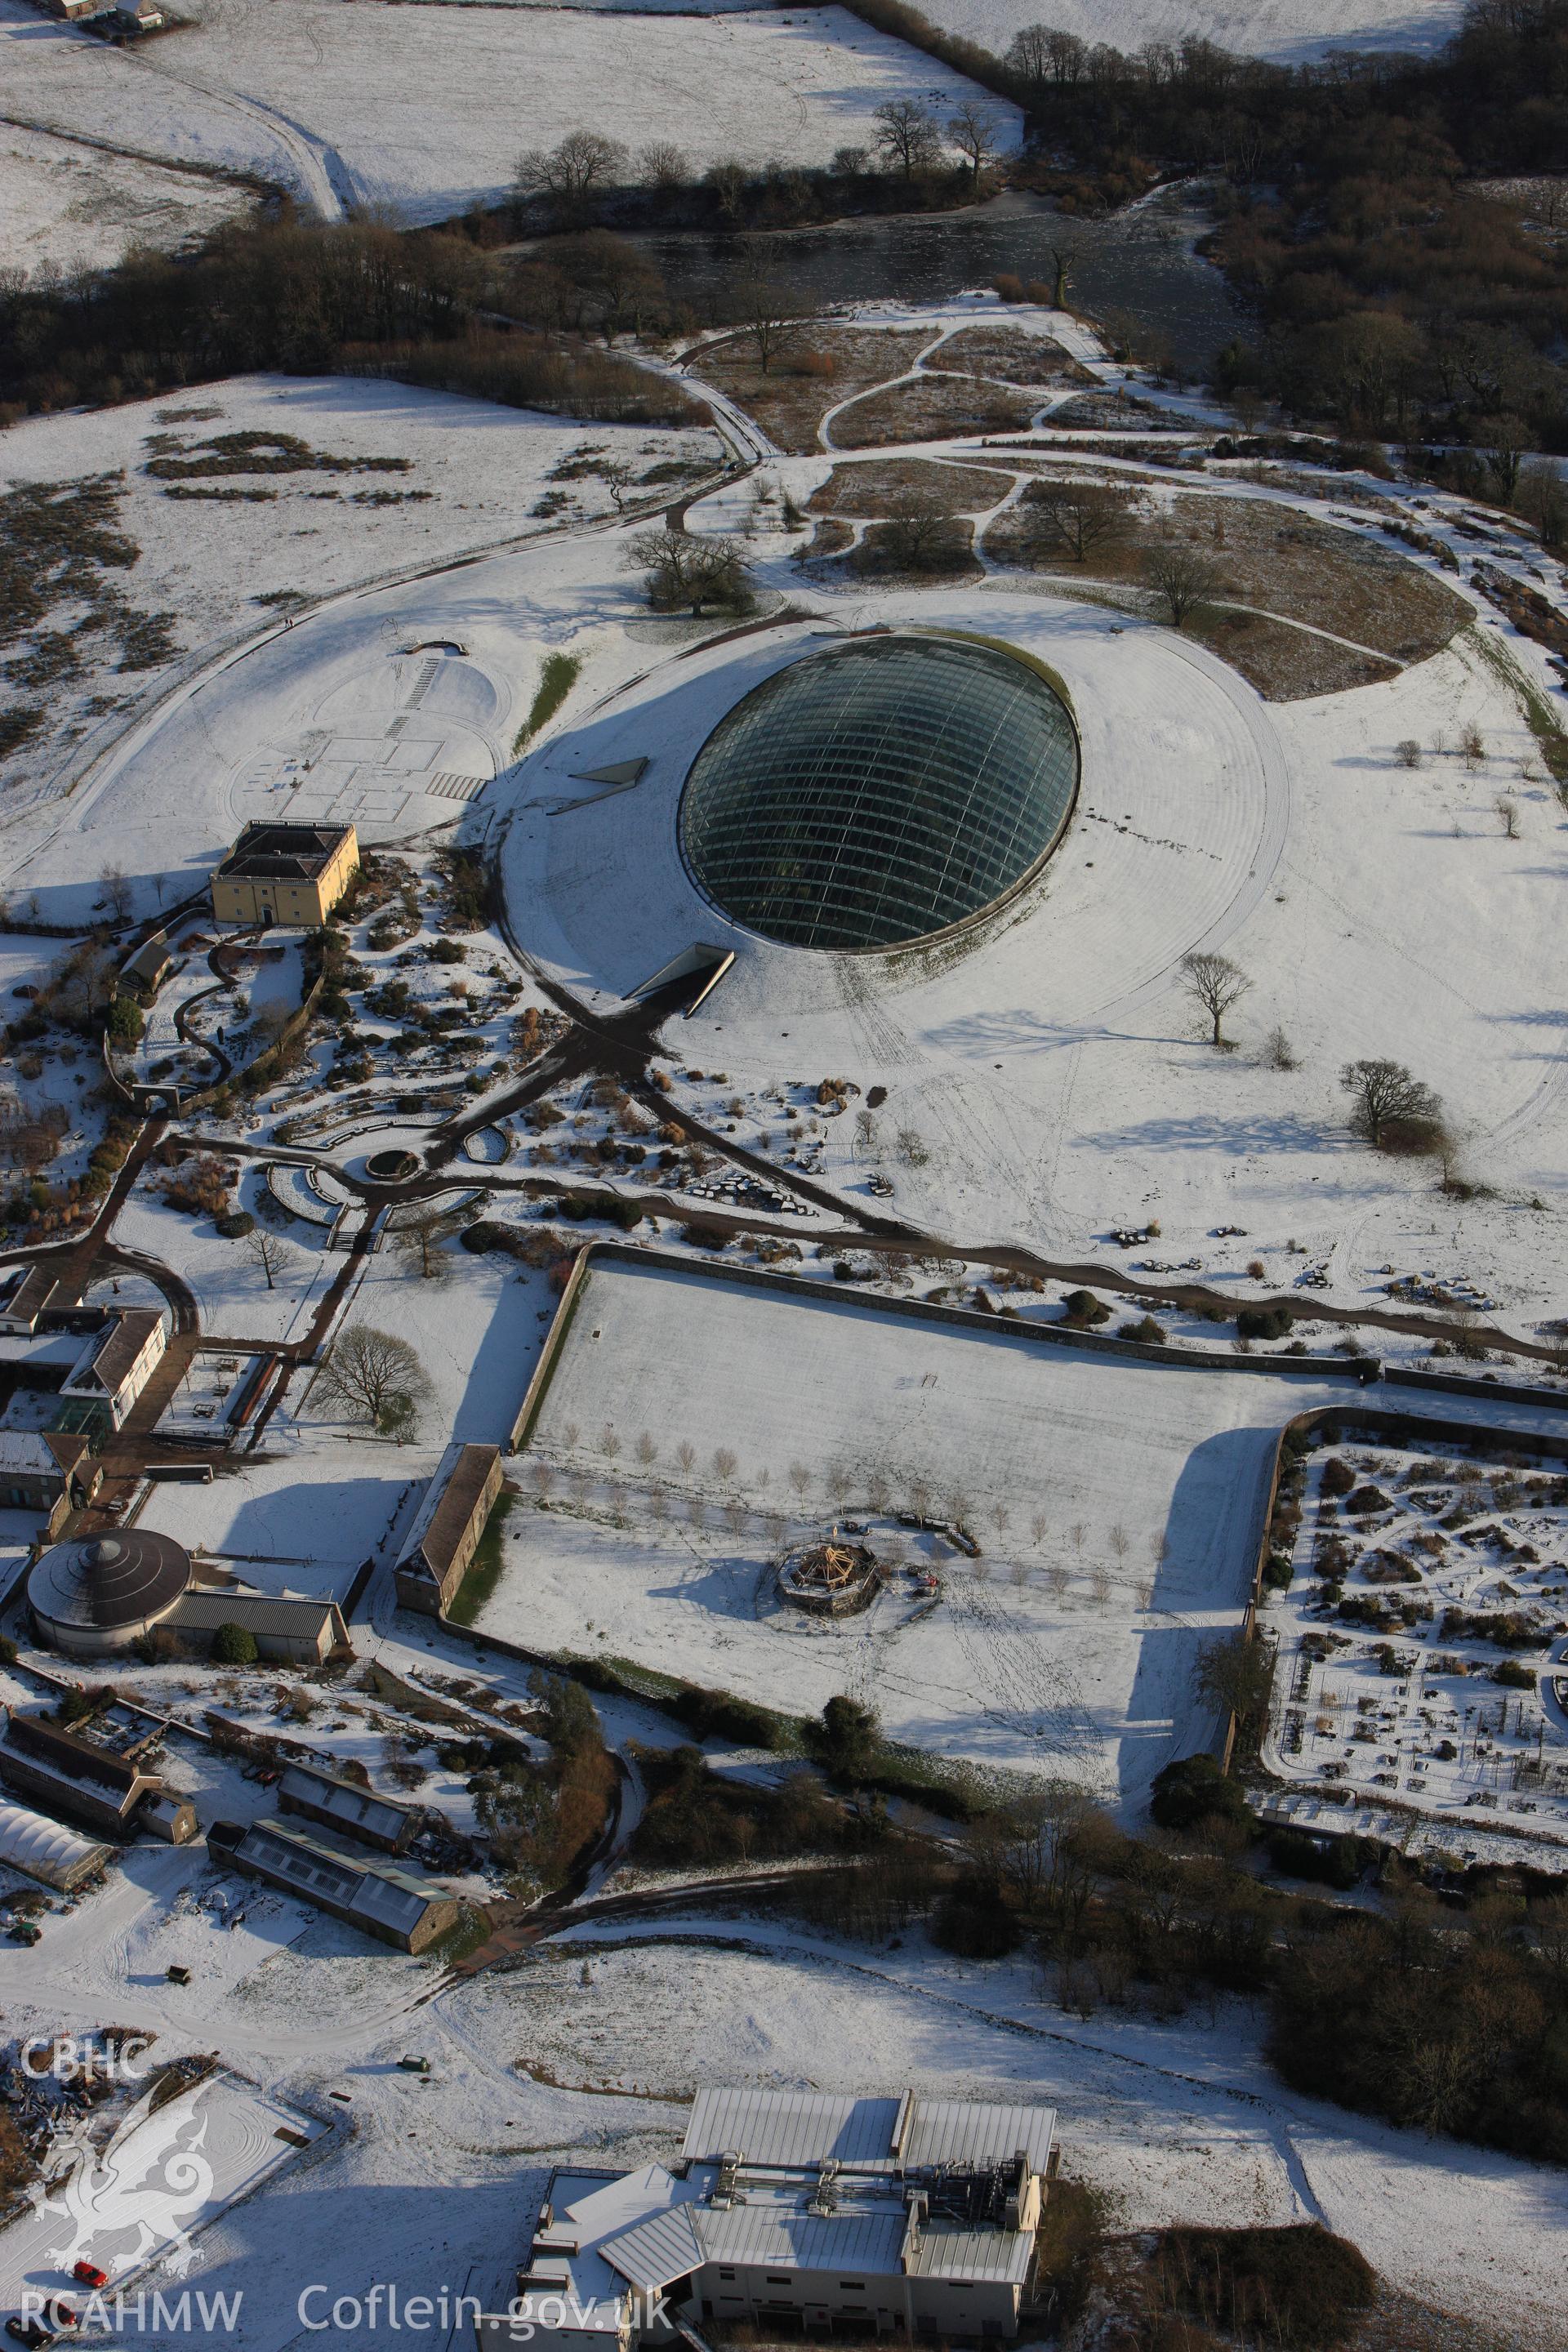 RCAHMW colour oblique photograph of the National Botanic Garden of Wales, with snow. Taken by Toby Driver on 01/12/2010.